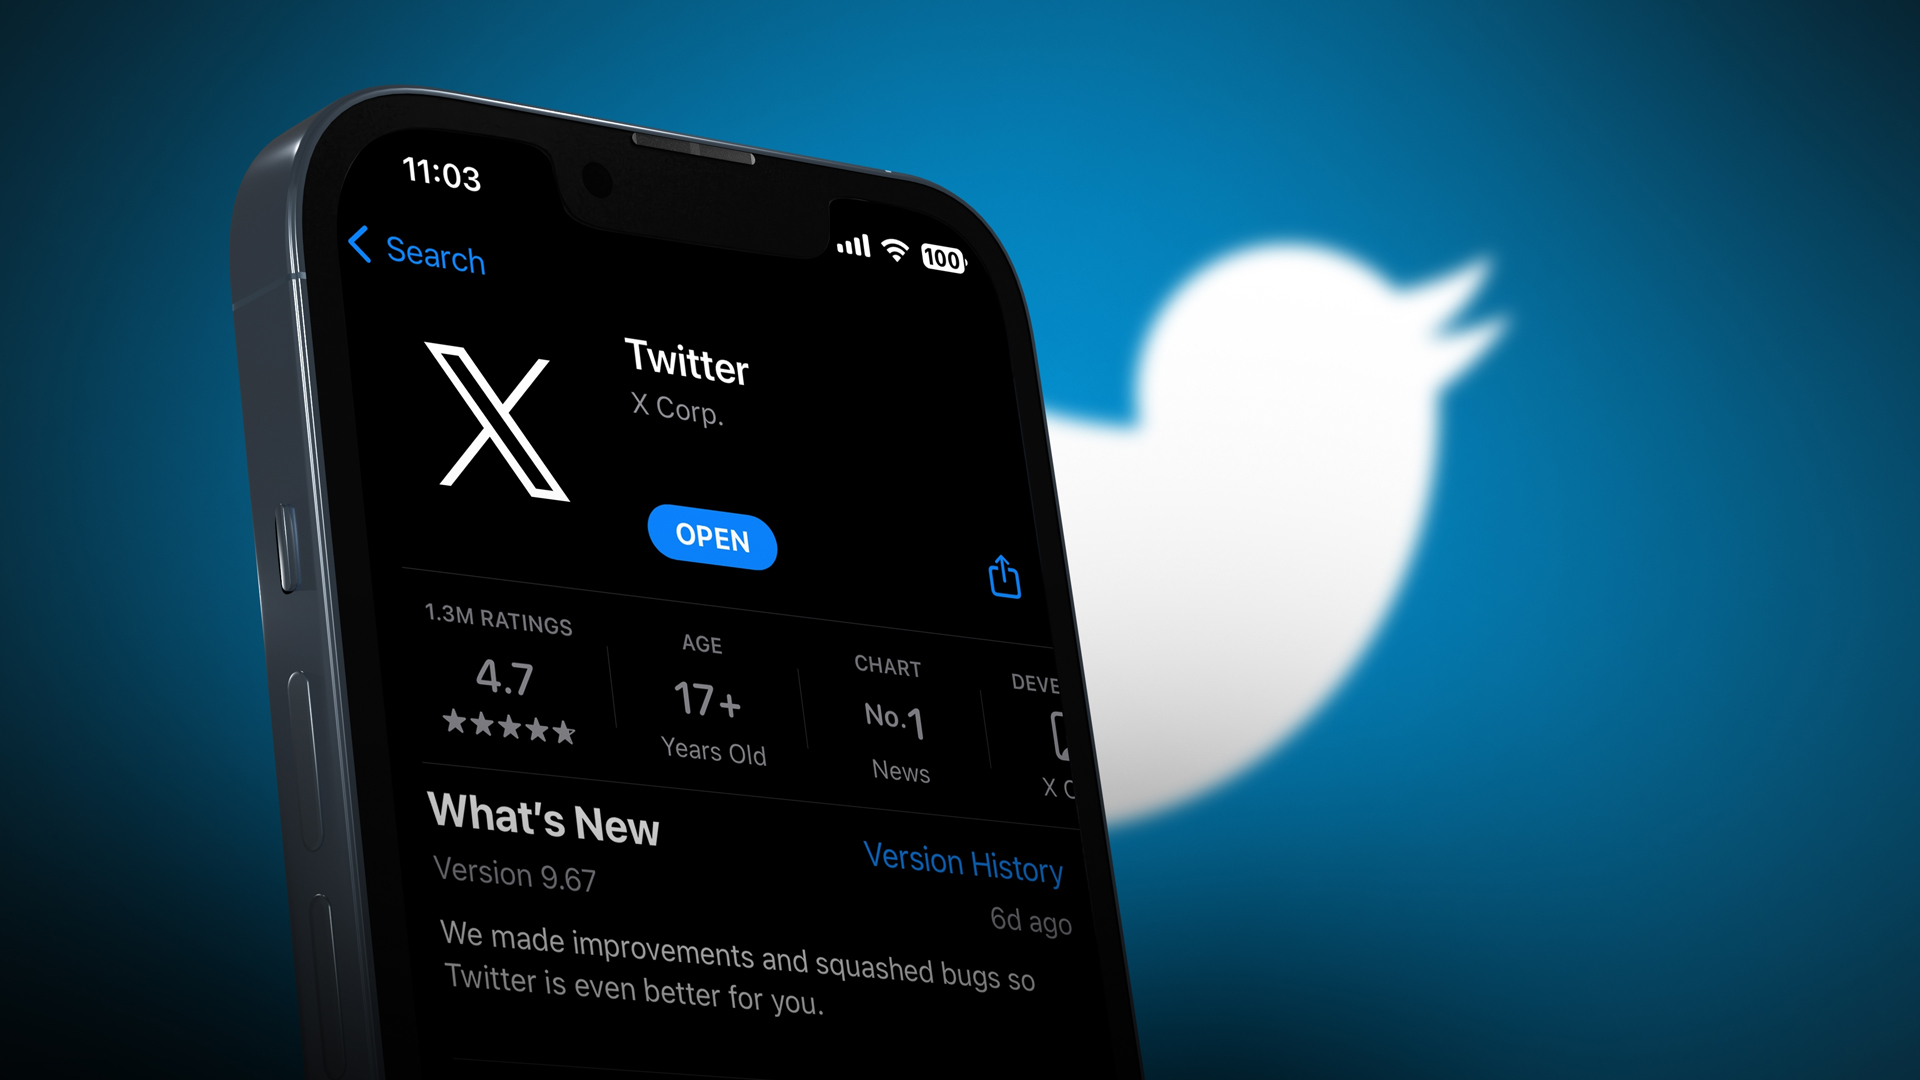 Twitter X How to wipe out 20B of brand equity